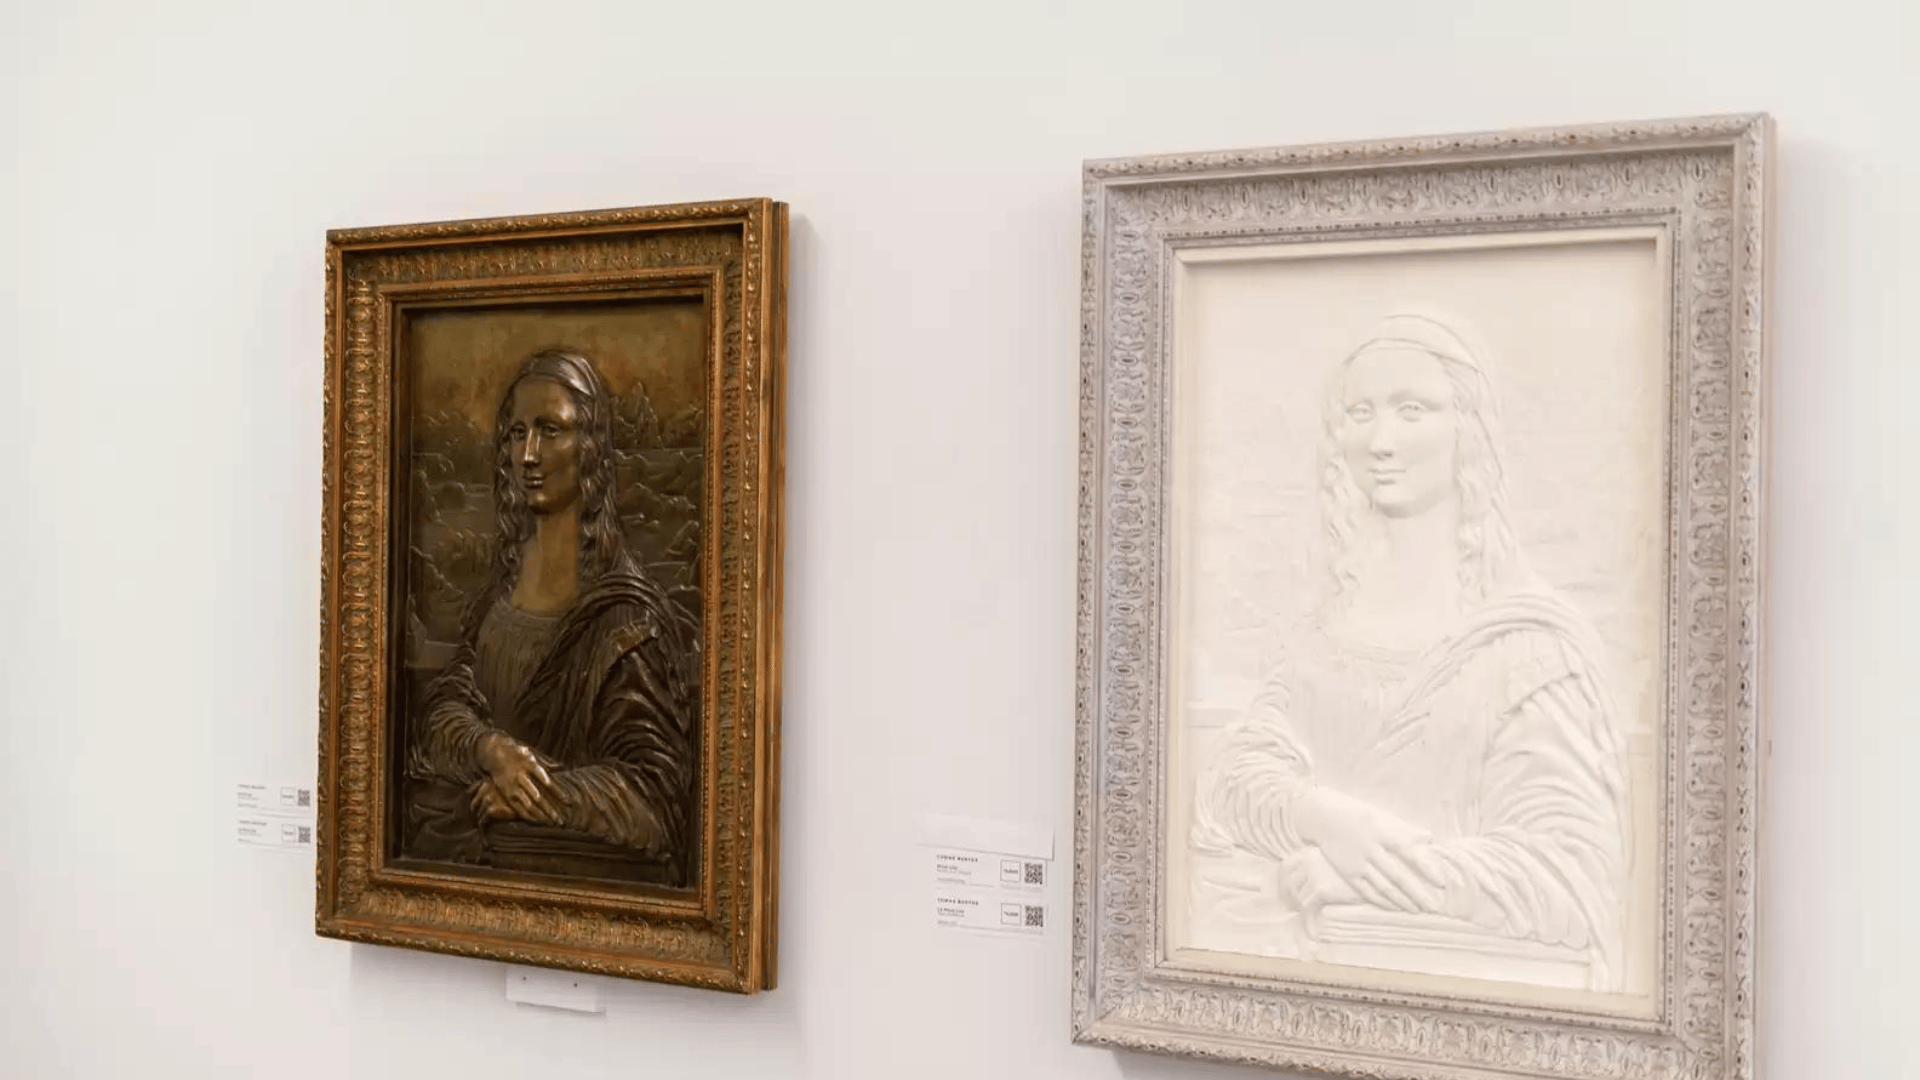 Mona Lisa Recreated With Texture For Visually Impaired